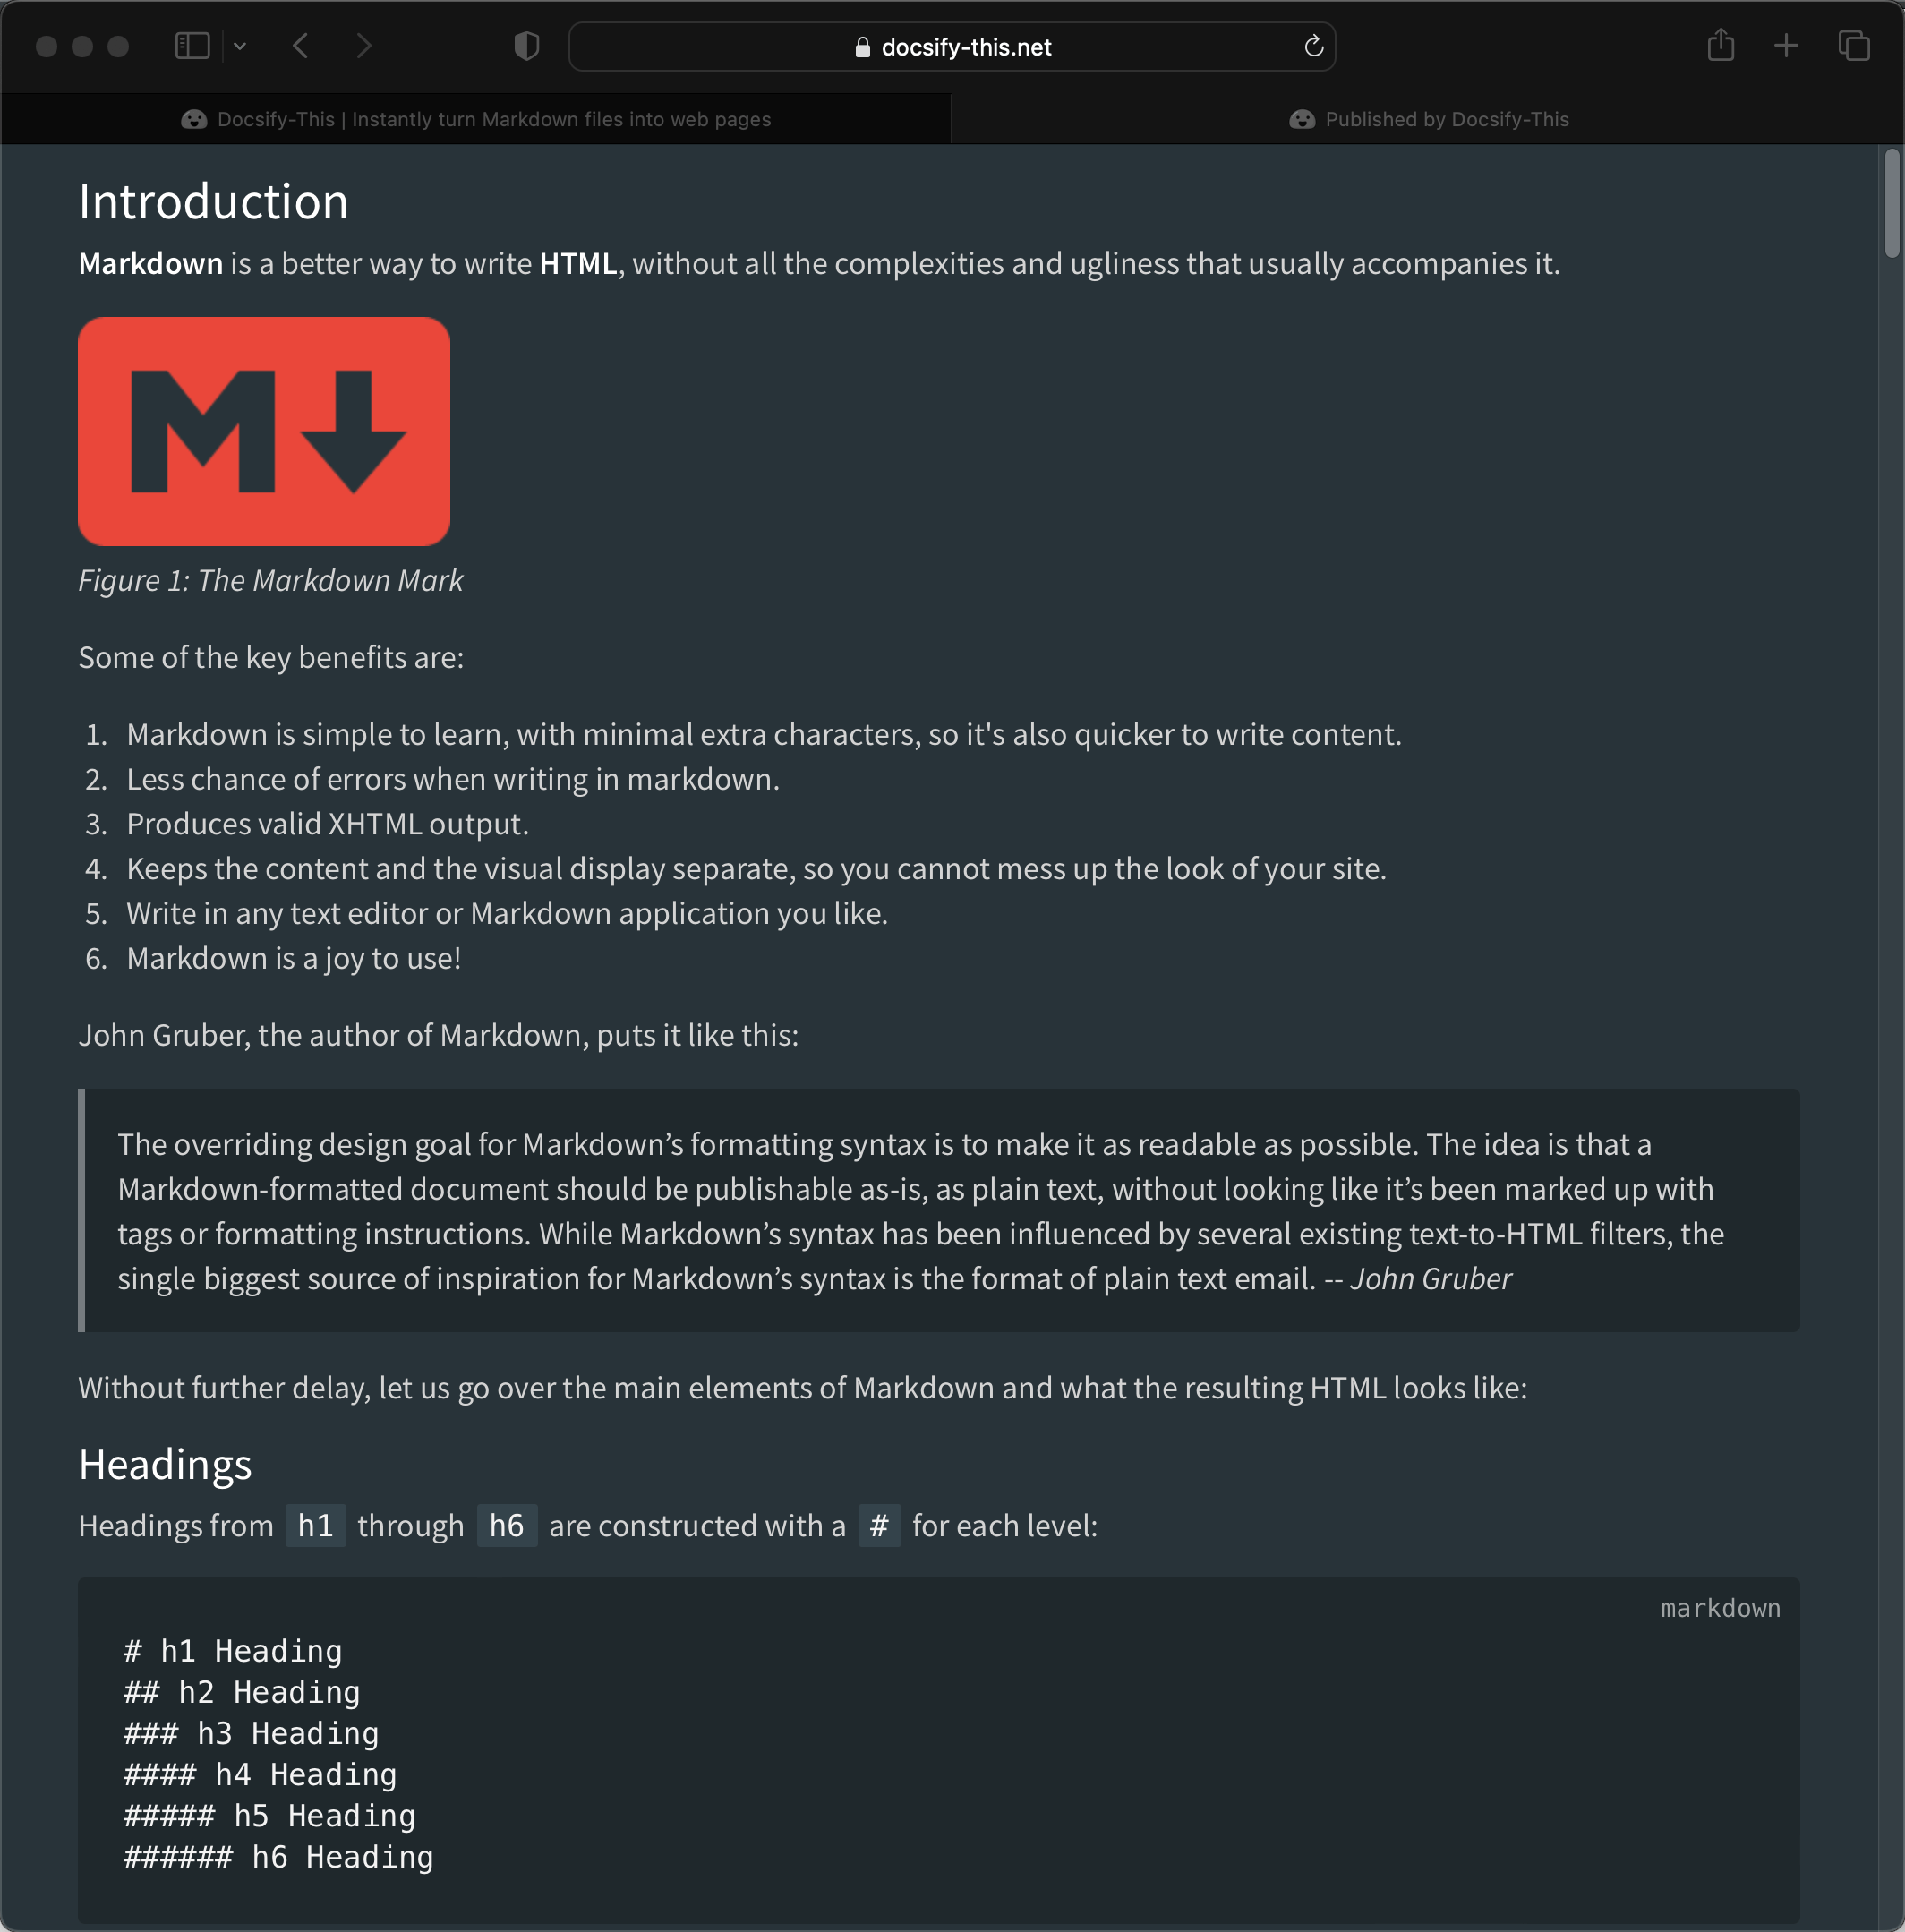 Docsify-This one page article in dark mode screenshot